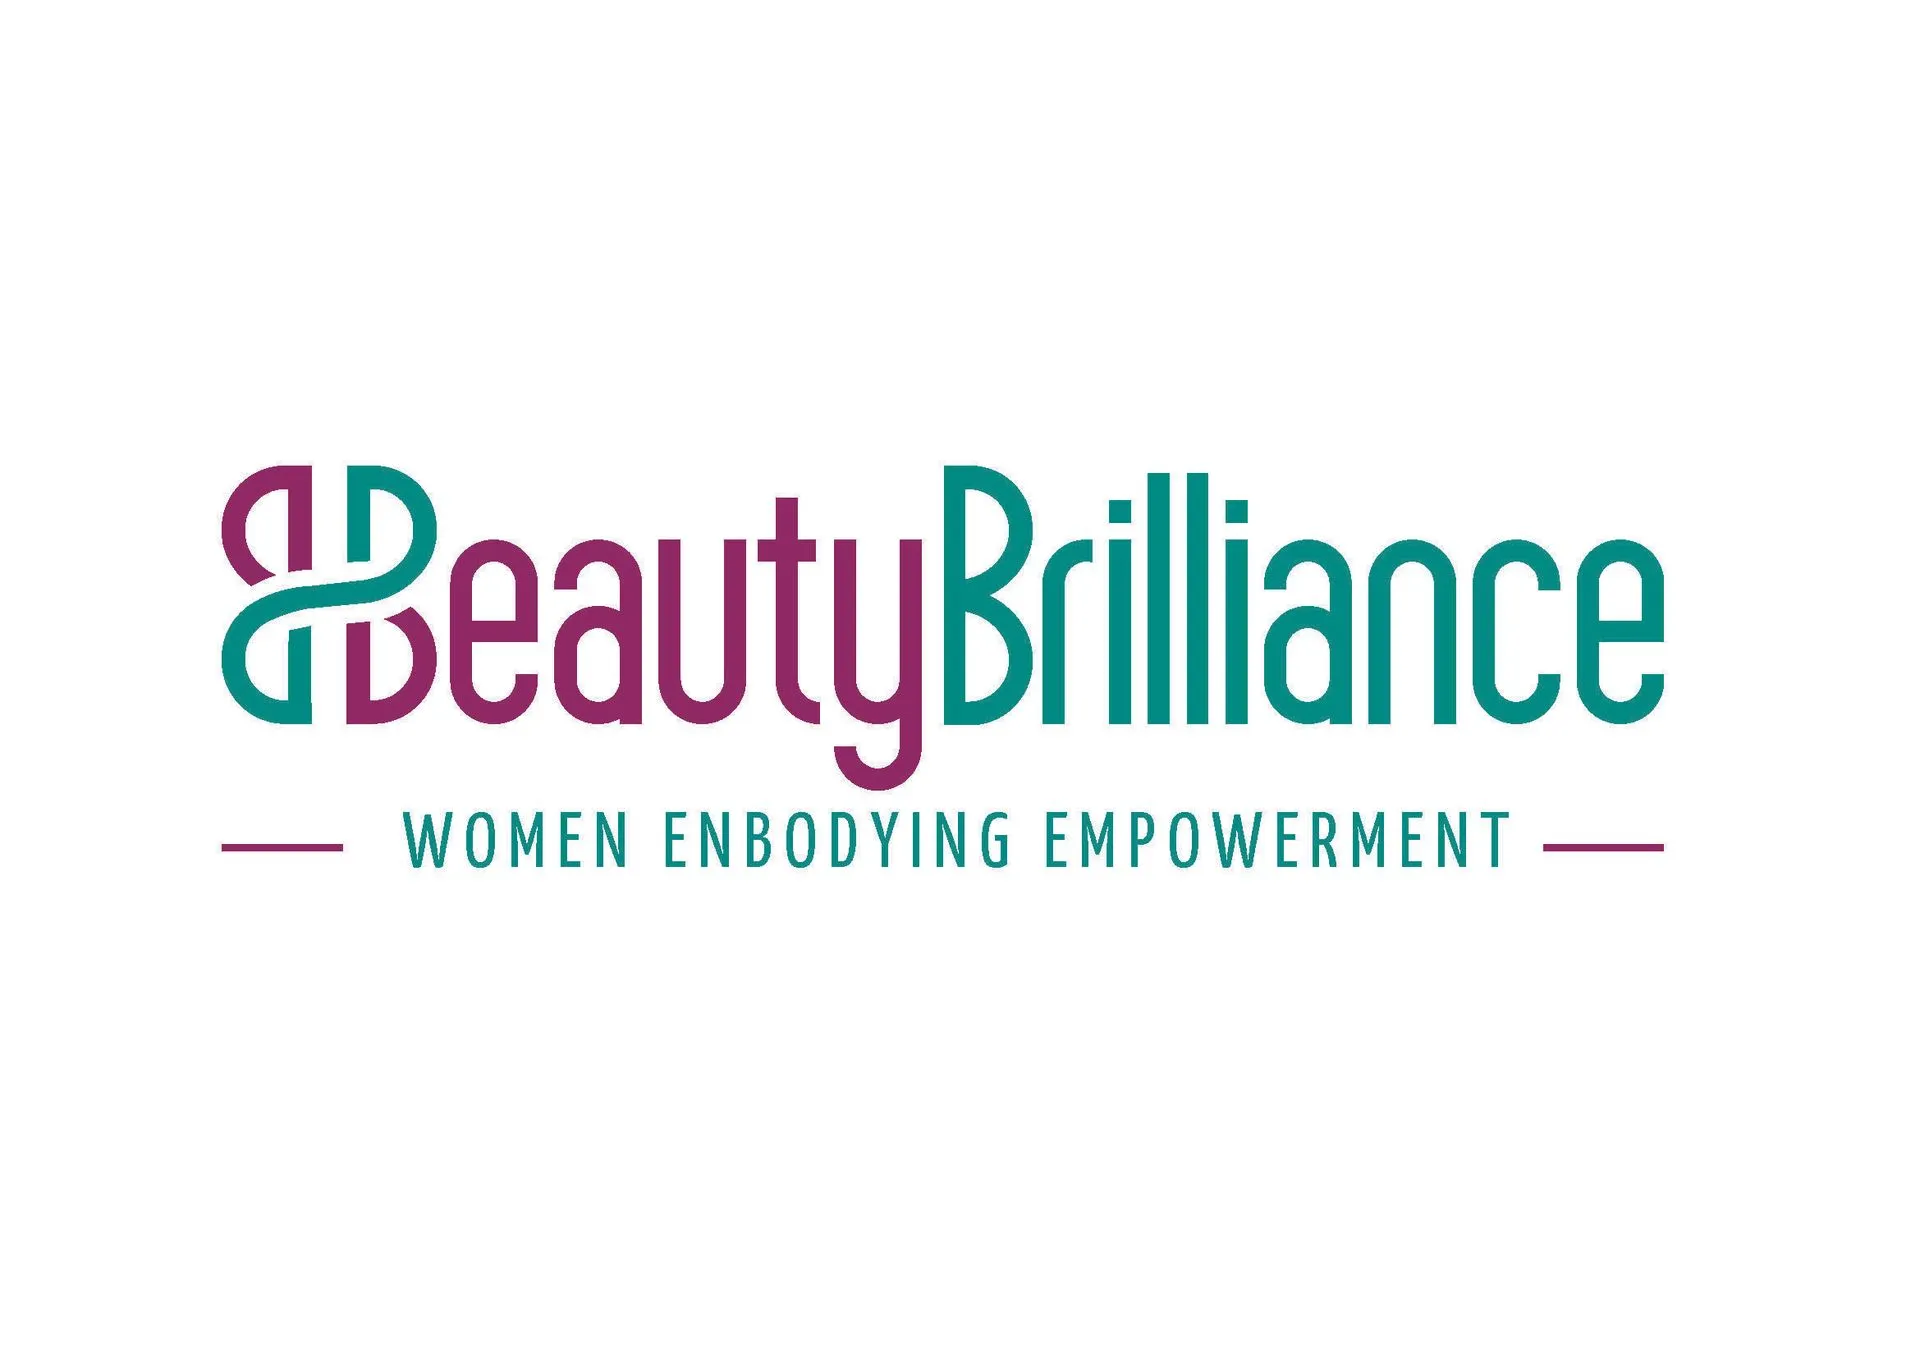 beautybrilliance+1_Page_1-1920w